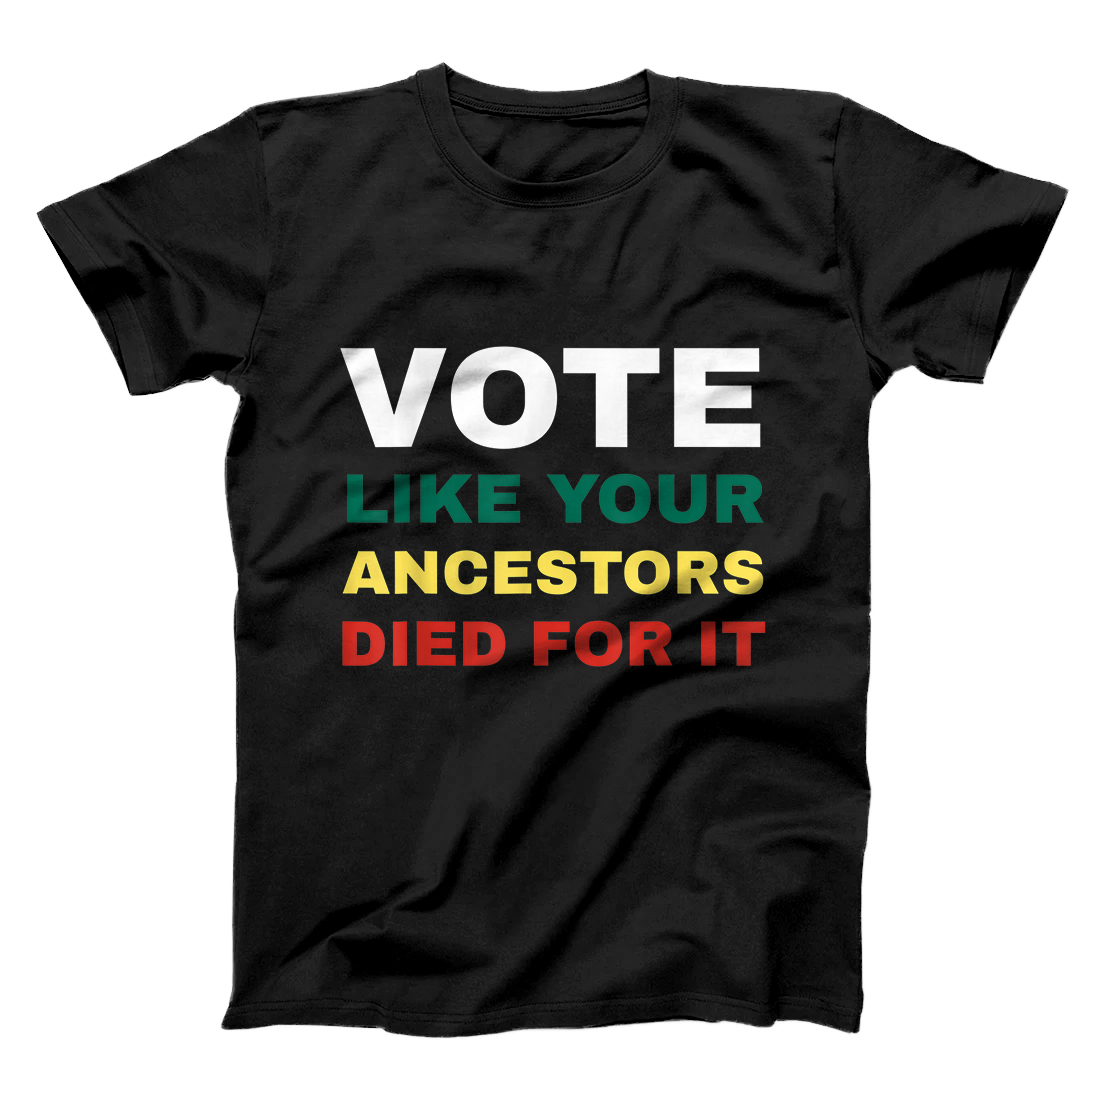 Personalized Vote Like Your Ancestors Died For It / Black Voters T-Shirt